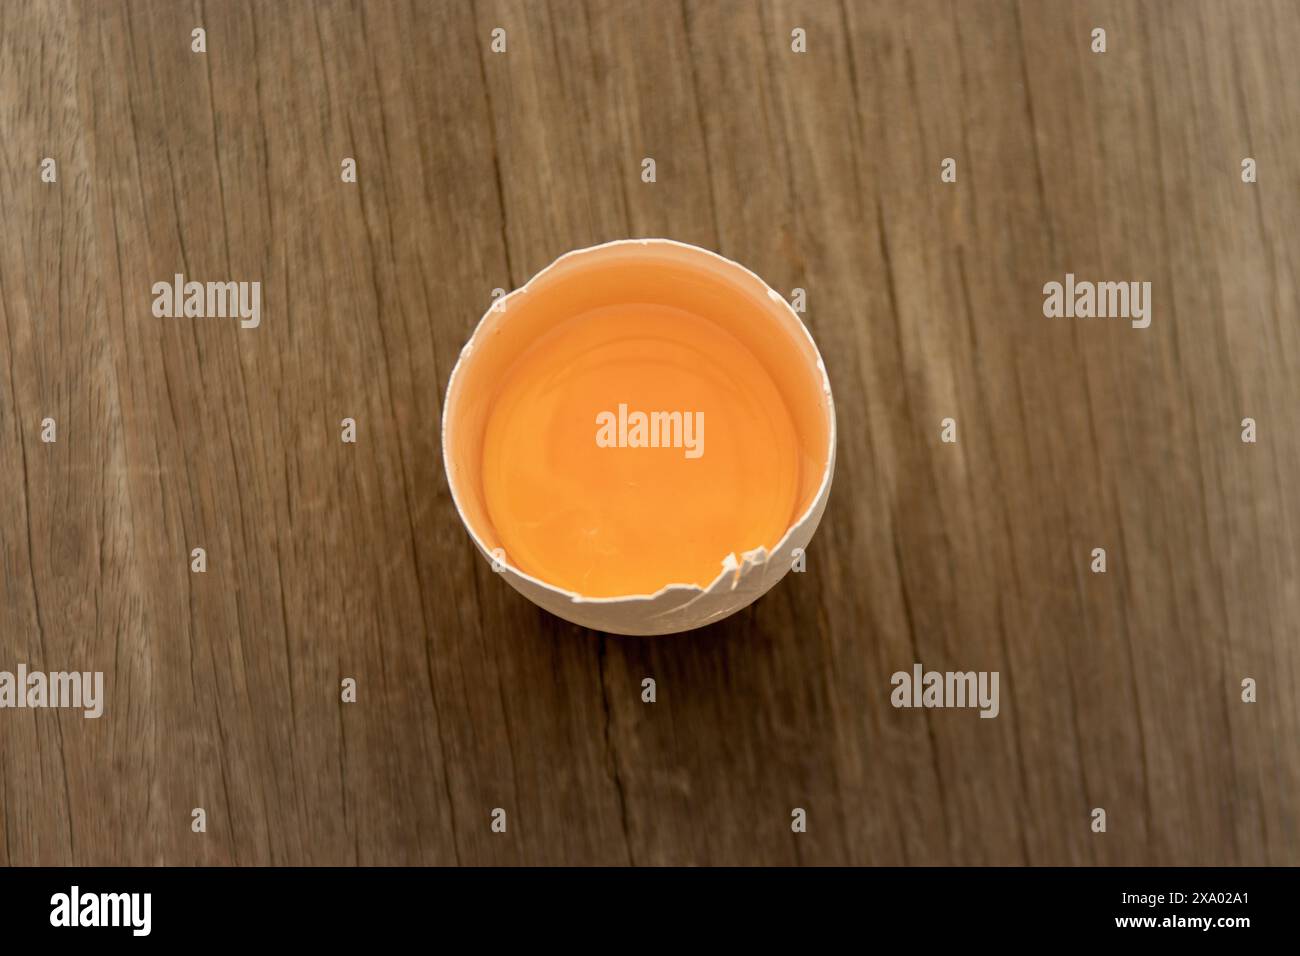 A top view of an egg on a wooden table surface Stock Photo